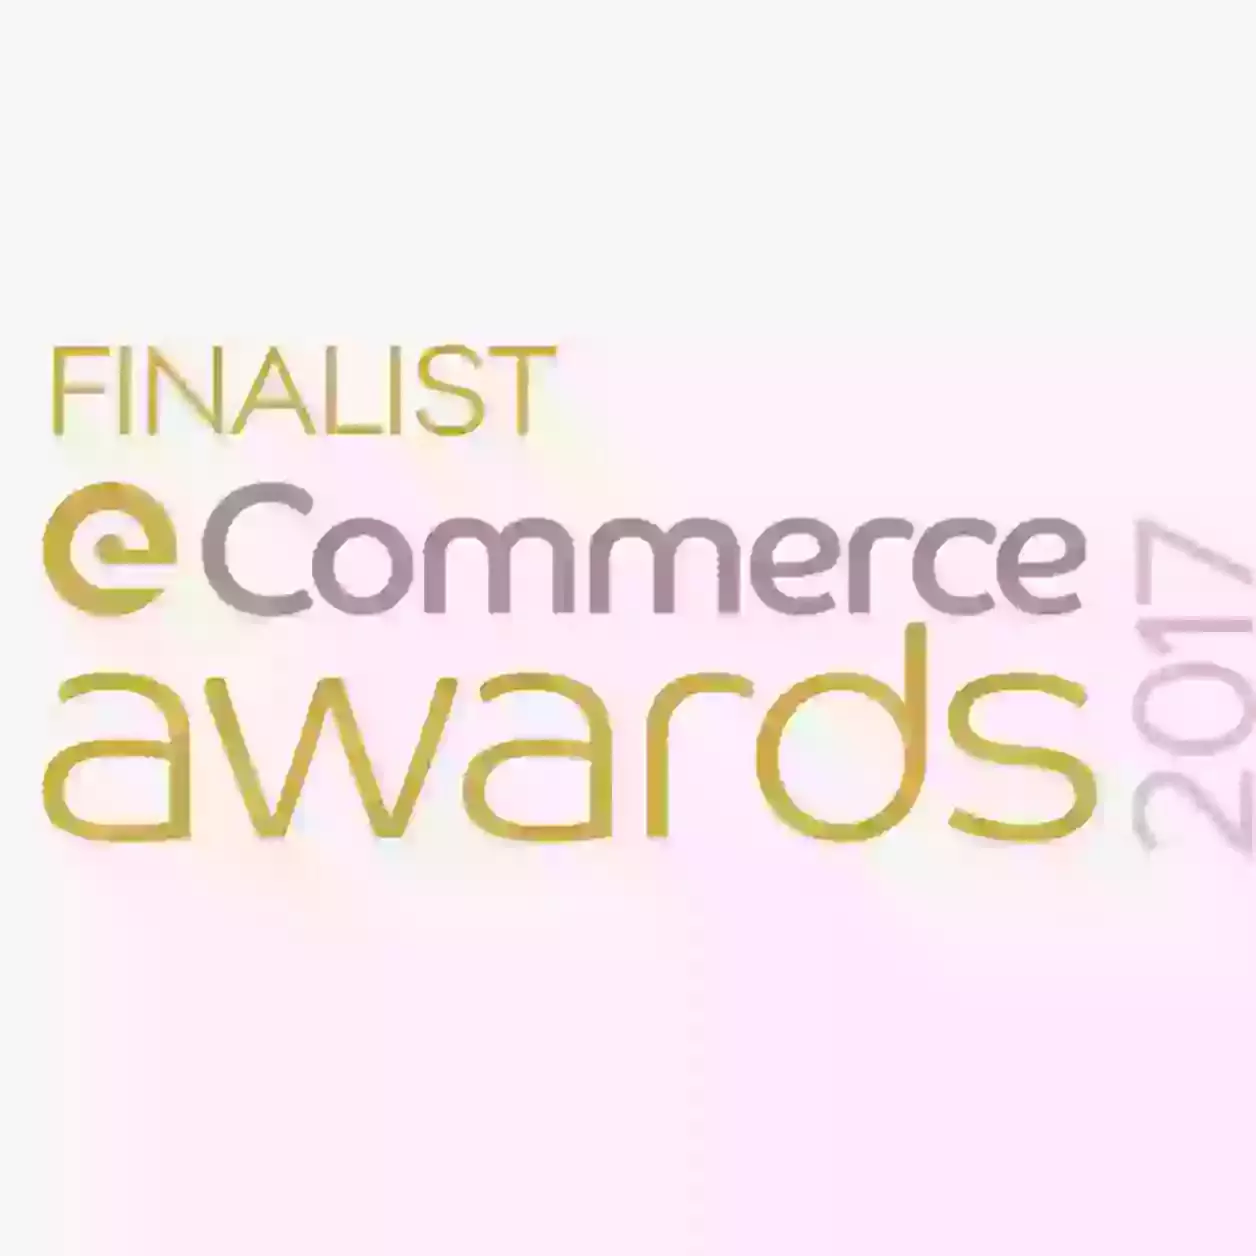 iPages Shortlisted for Best eCommerce Product at 2017 eCommerce Awards